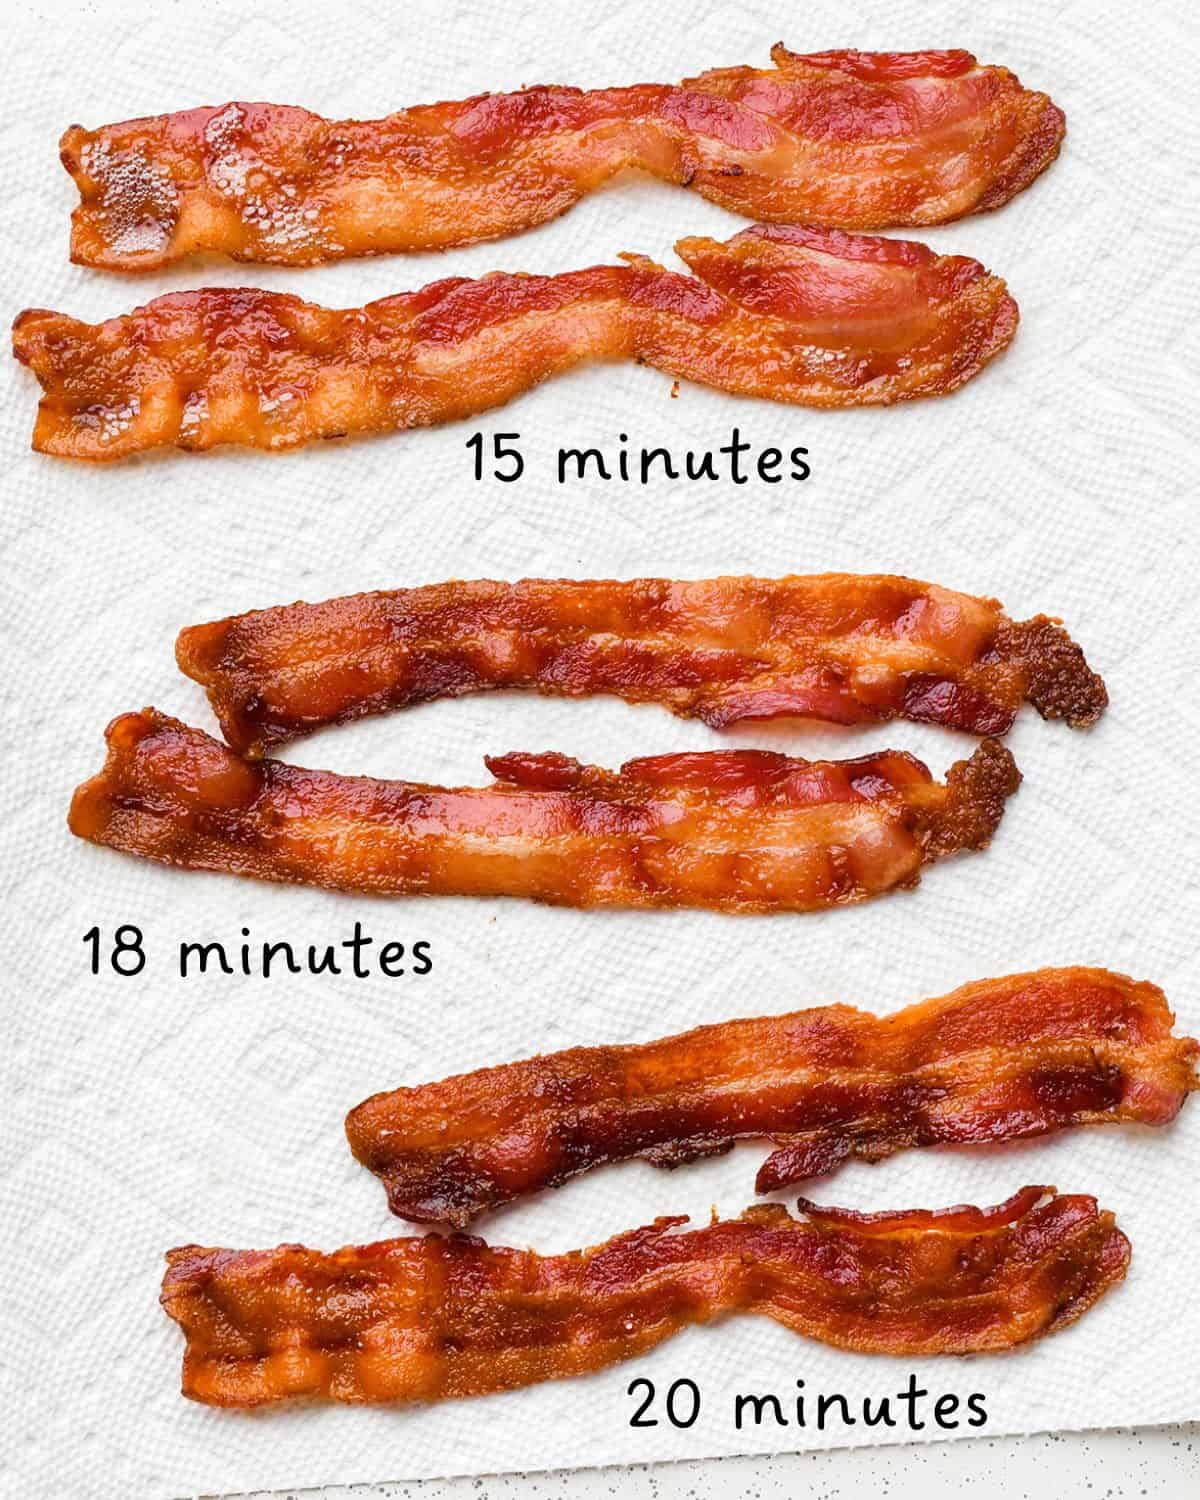 How to Cook Bacon in the Oven - 6 pieces of bacon in 3 pairs, baked for different amounts of time